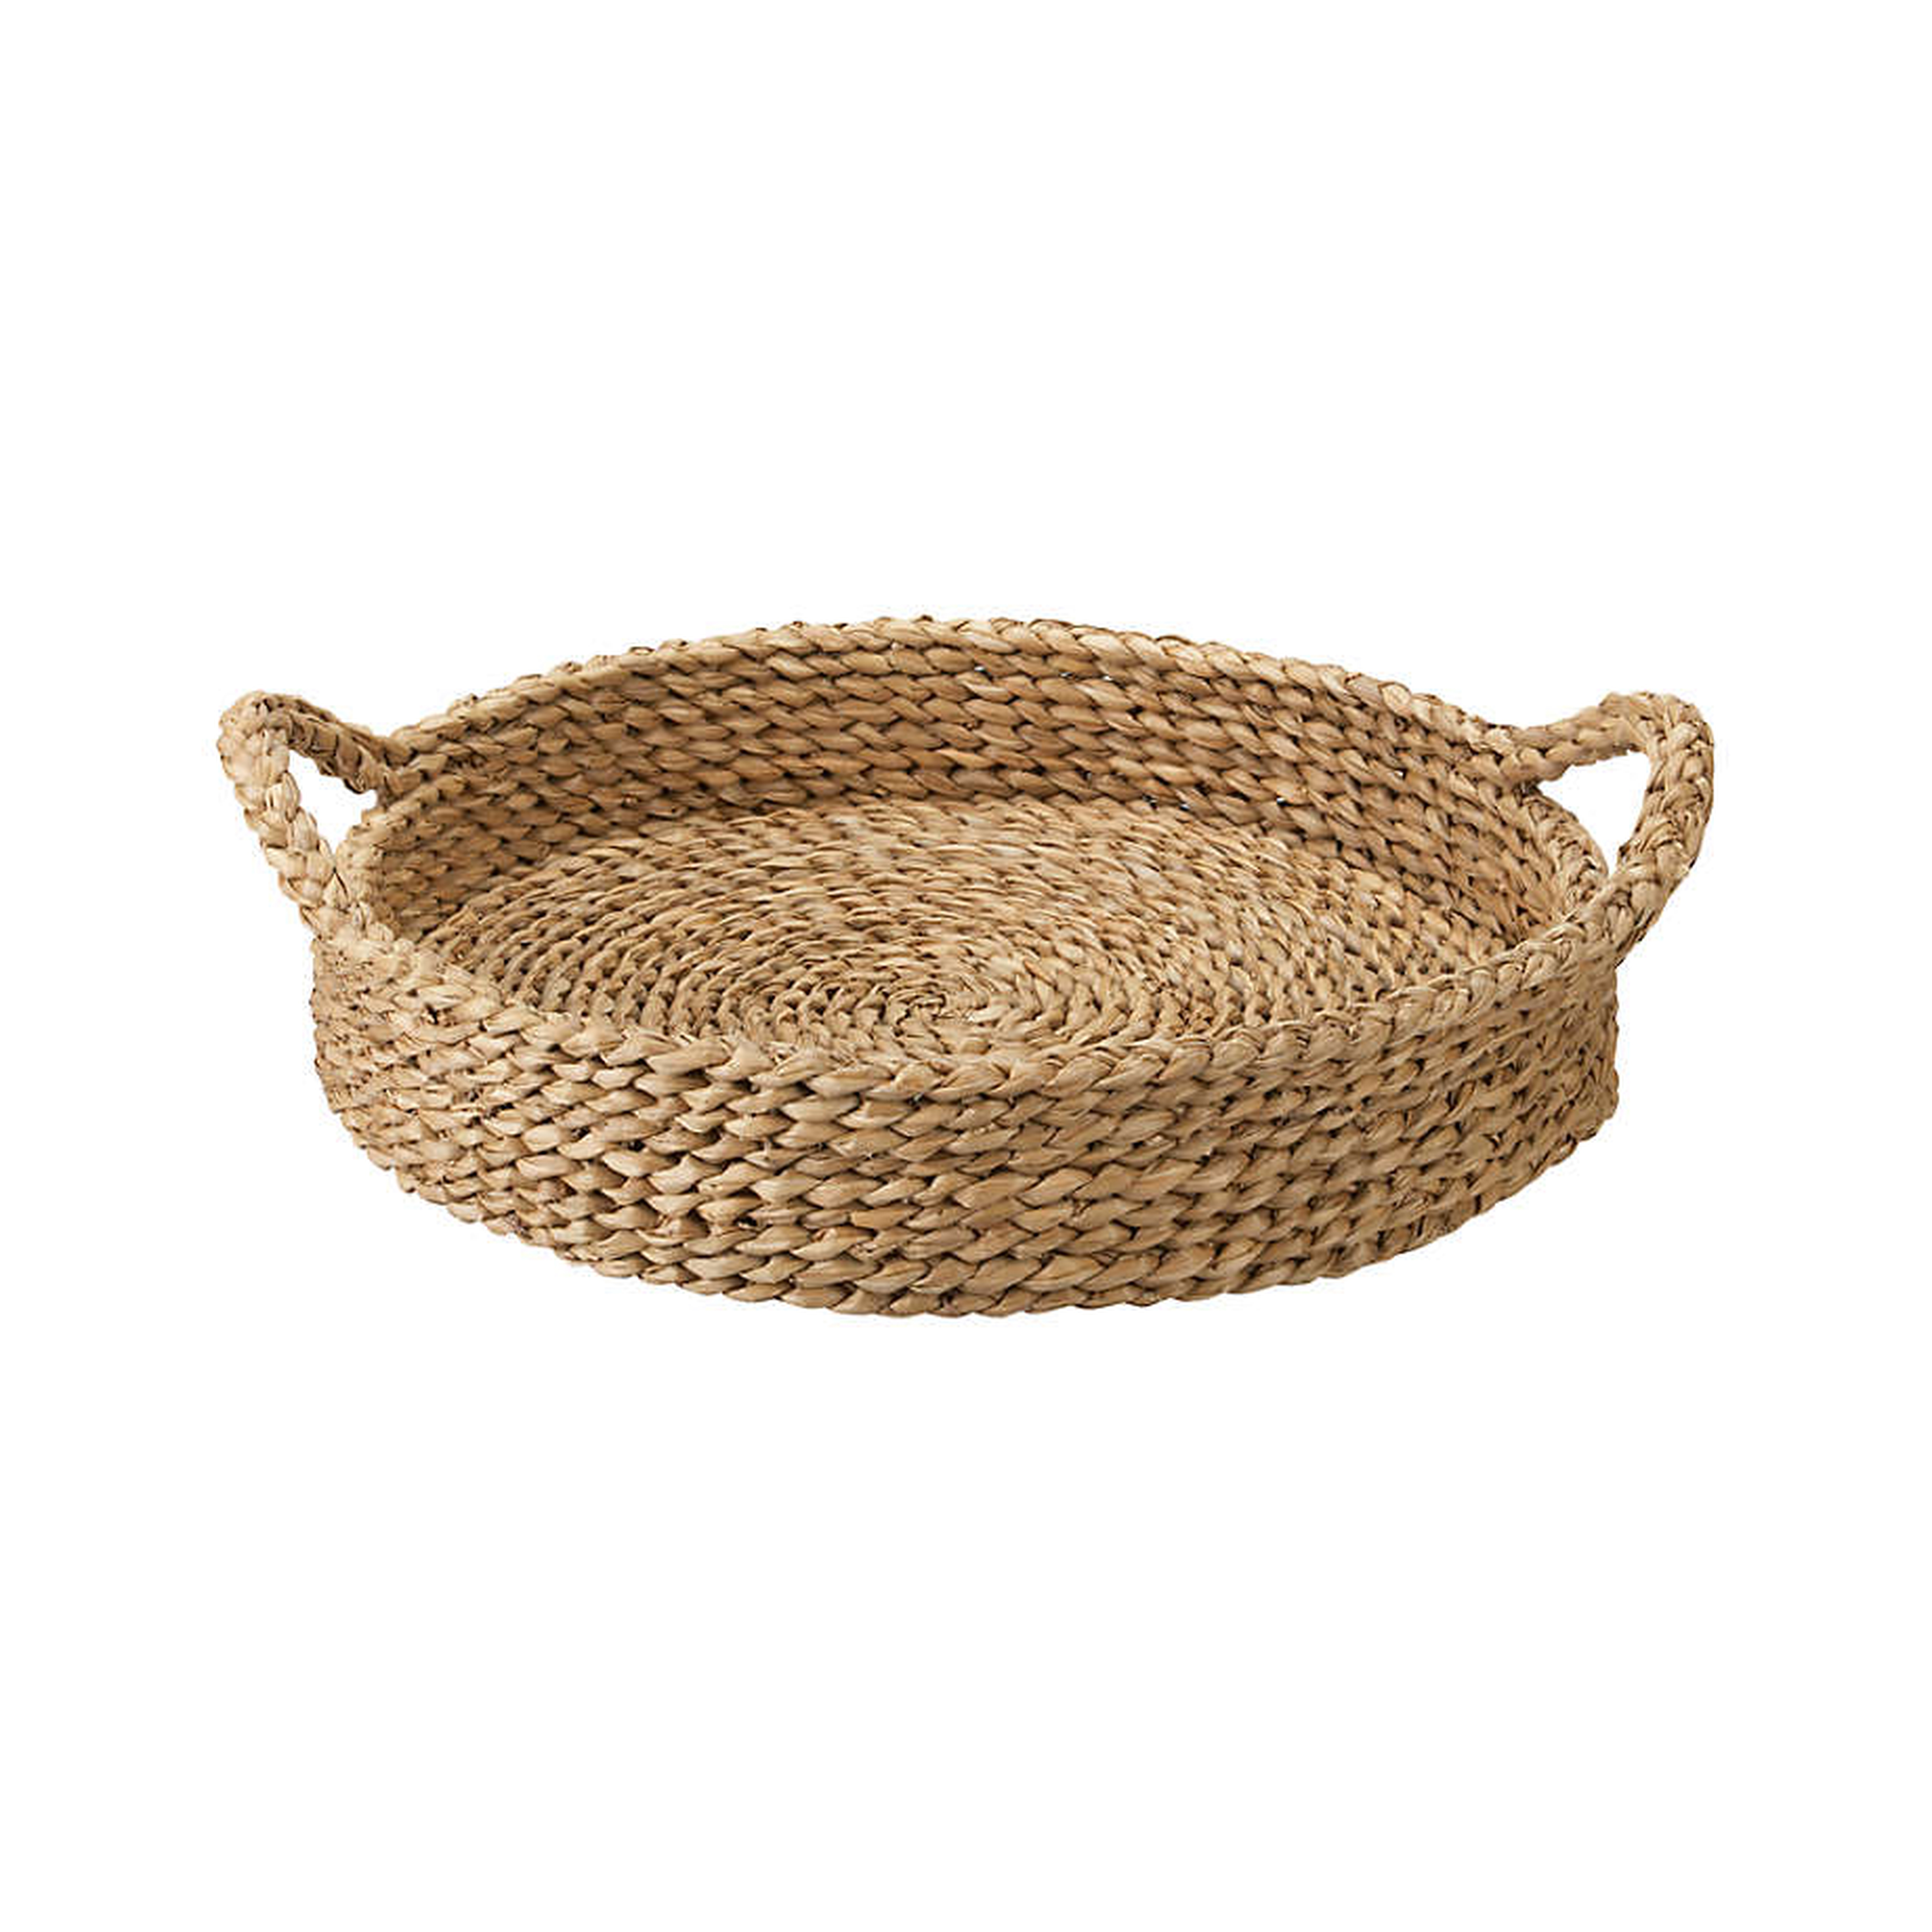 Onslow Handwoven Round Decorative Tray 17" - Crate and Barrel